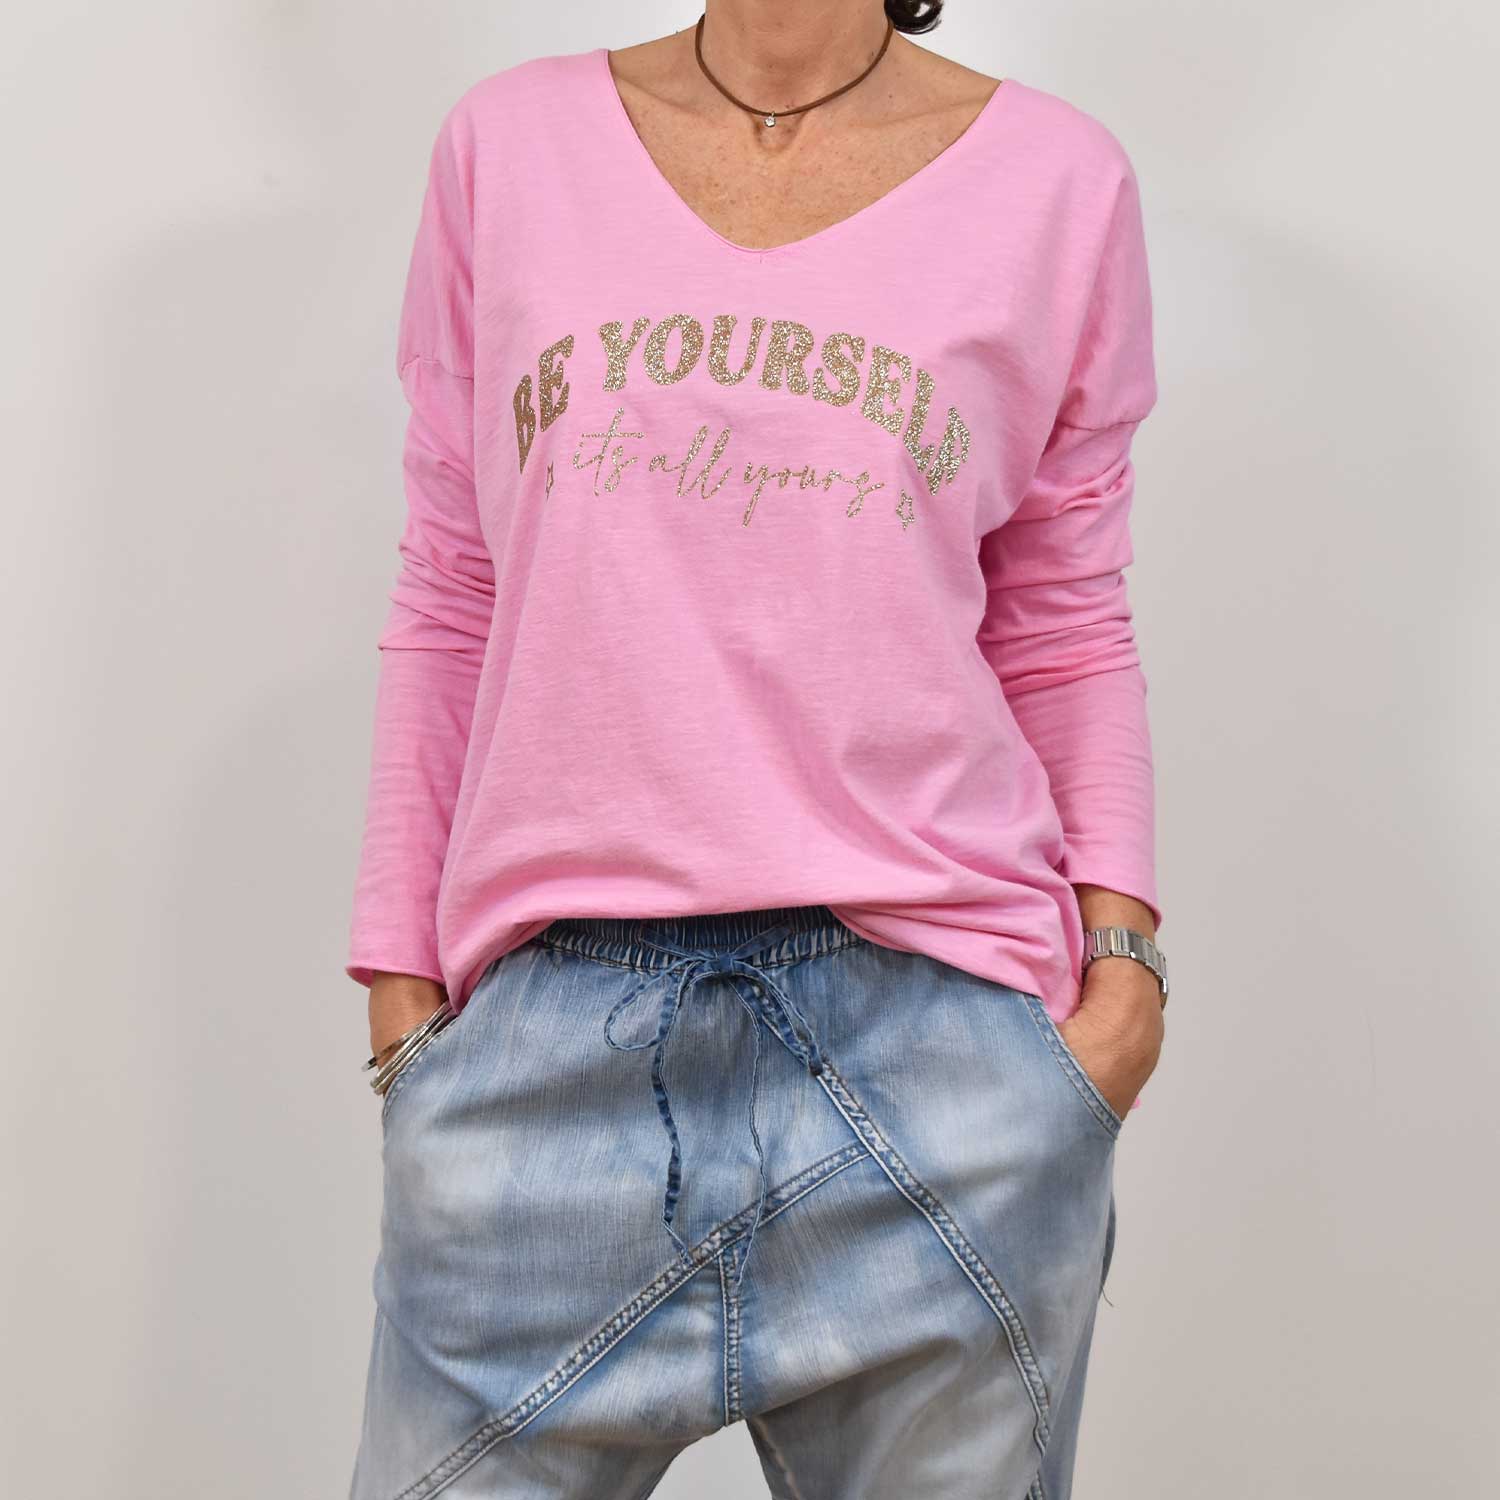 Pink 'Be Yourself' t-shirt